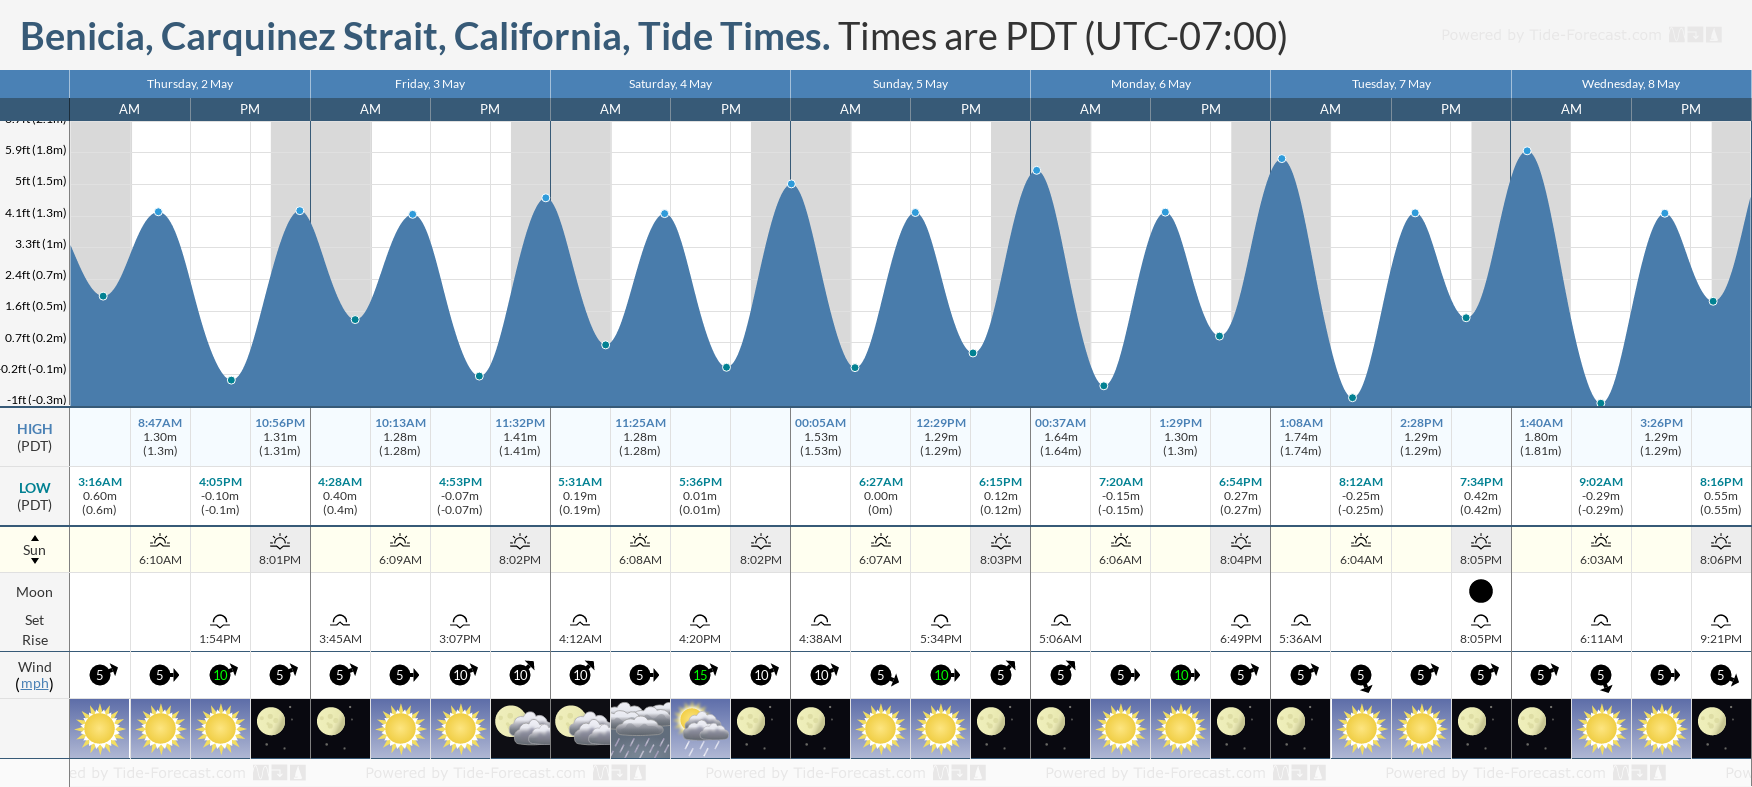 Benicia, Carquinez Strait, California Tide Chart including high and low tide tide times for the next 7 days